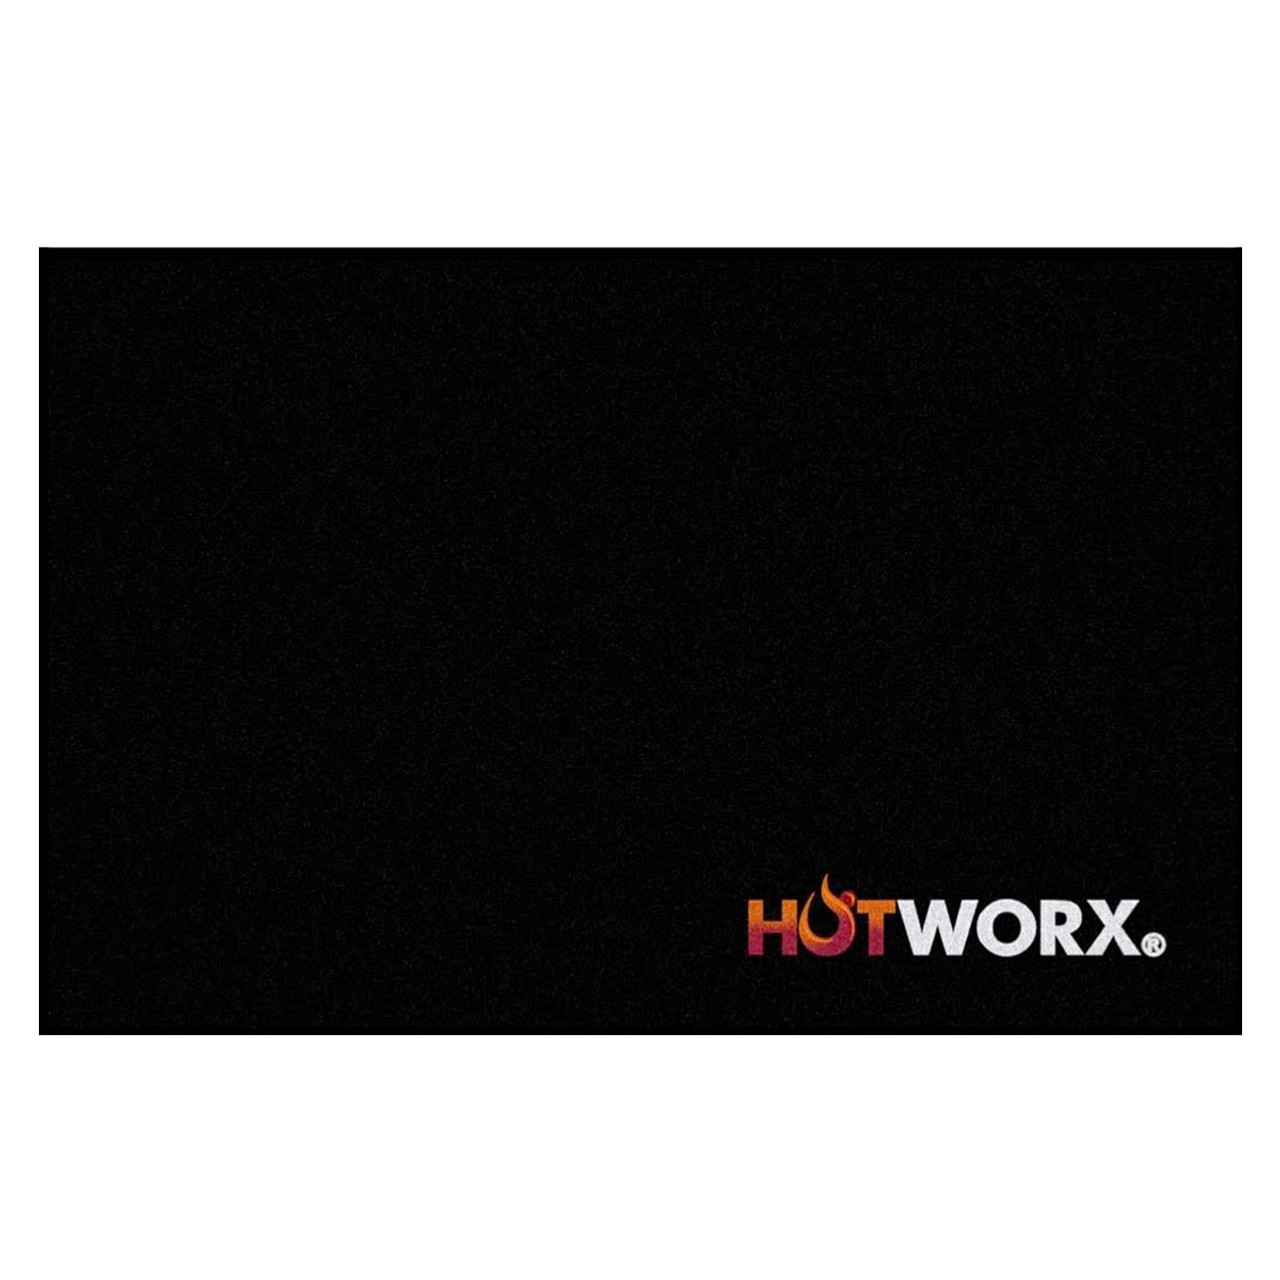 HOTWORX Mat for Near Sauna, 2-Pack | Guardian Floor Protection